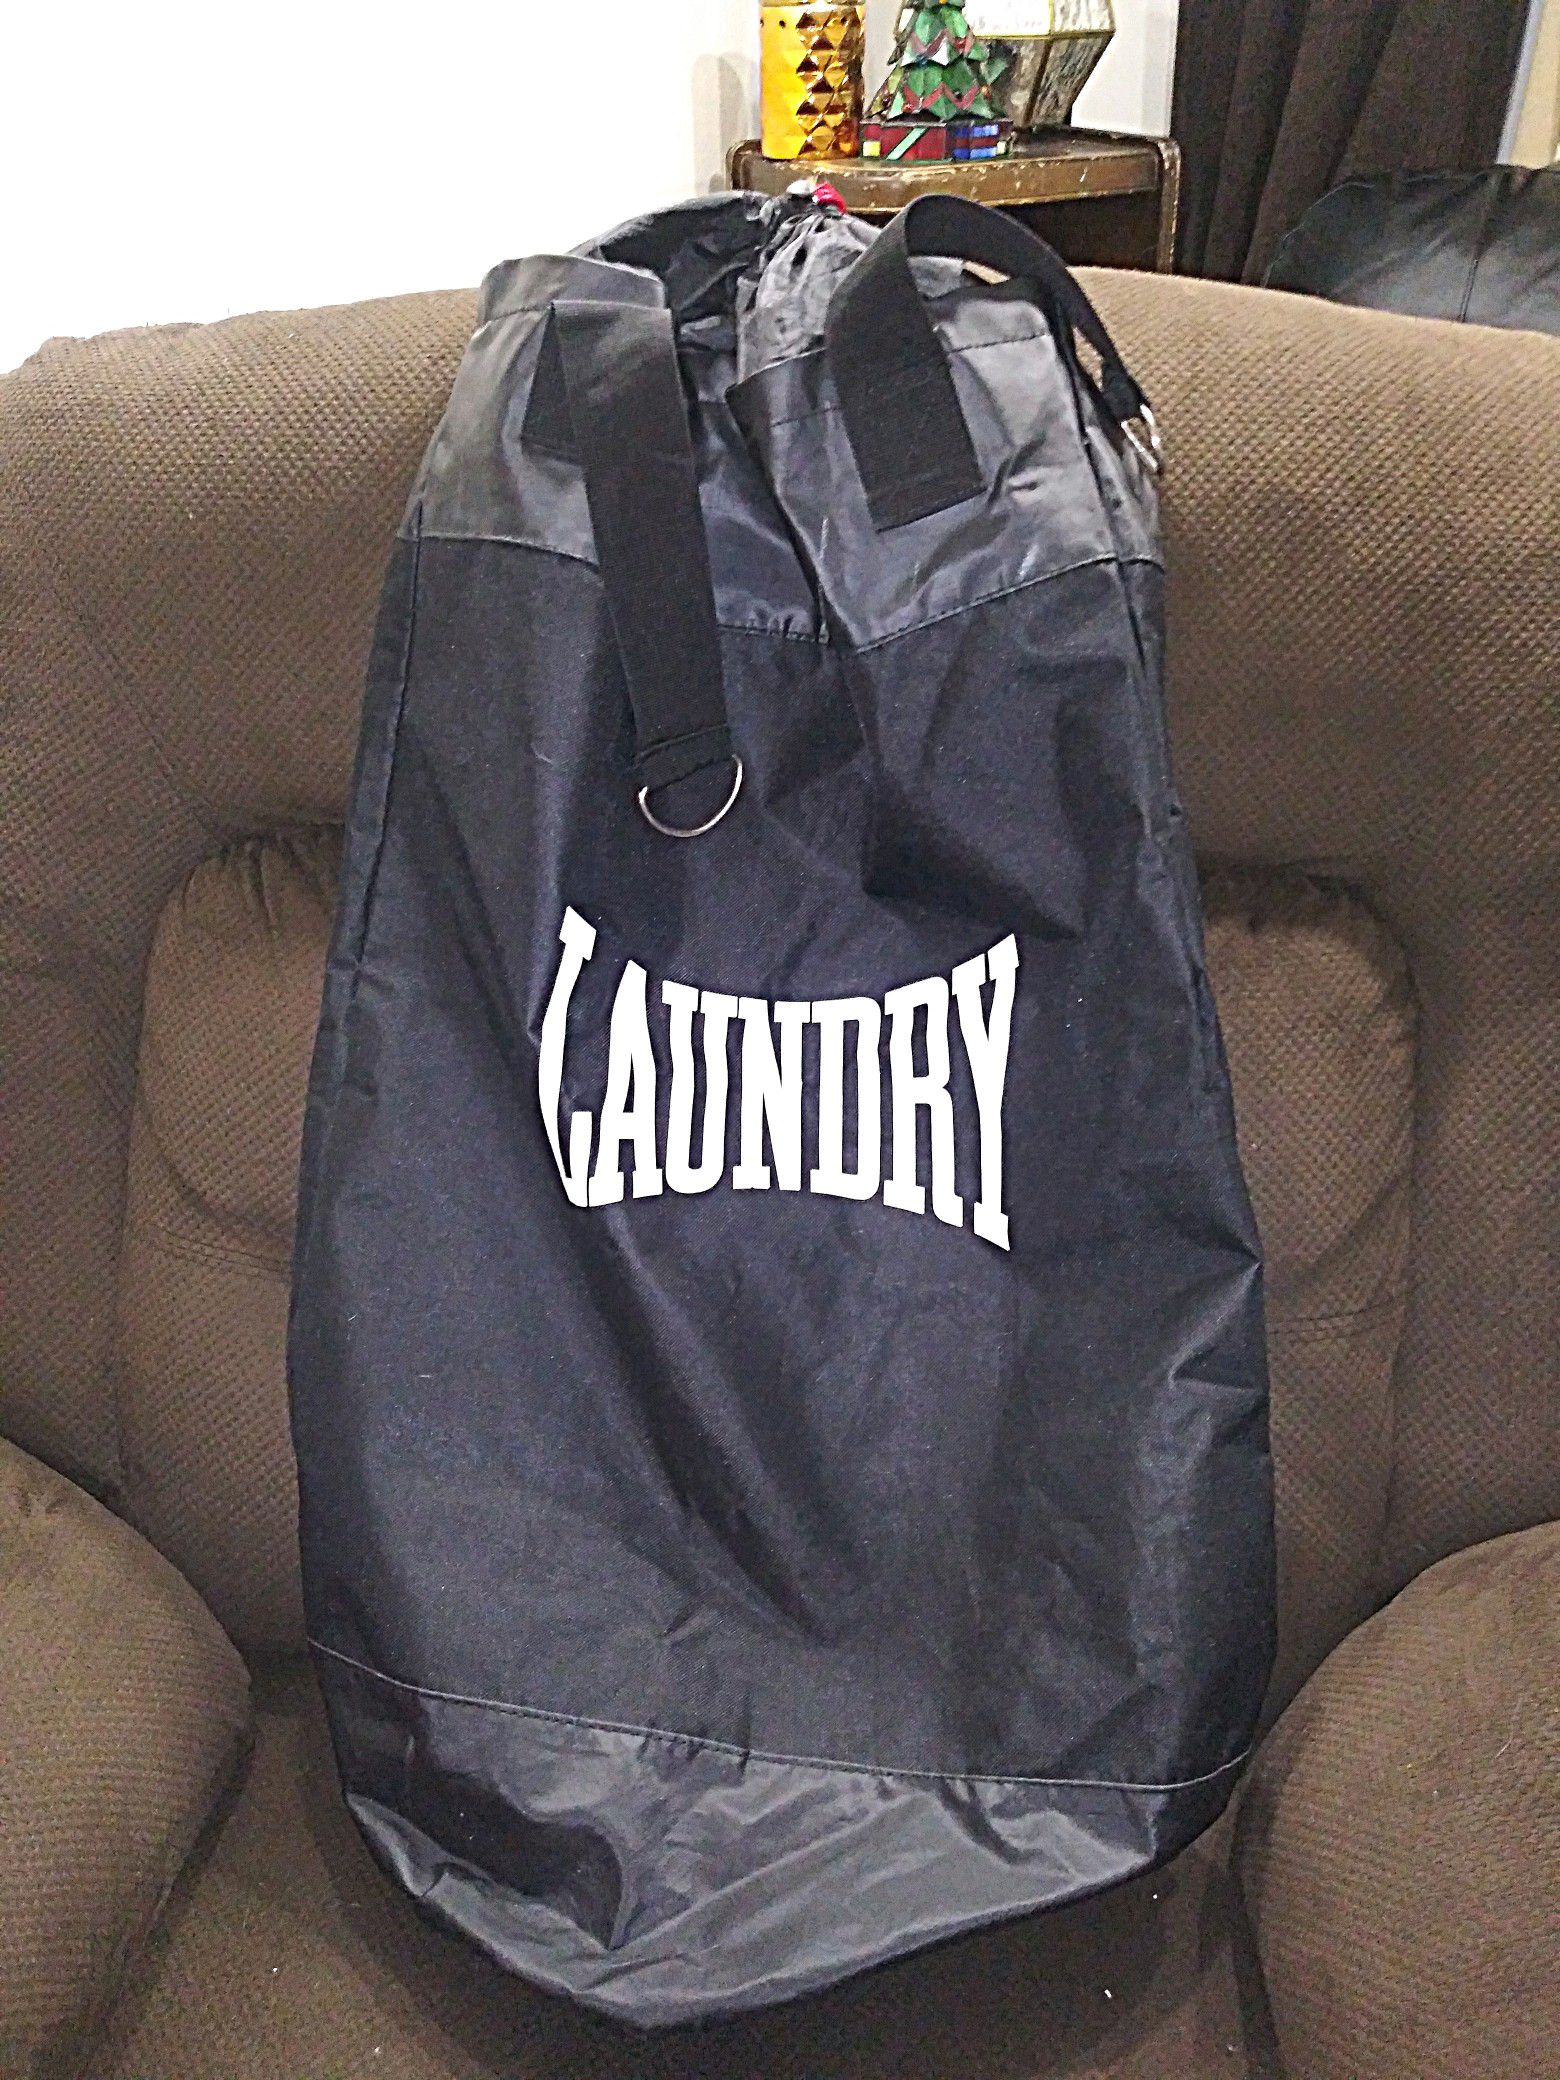 Hanging Laundry bag made to look like Punching bag/Never used $12